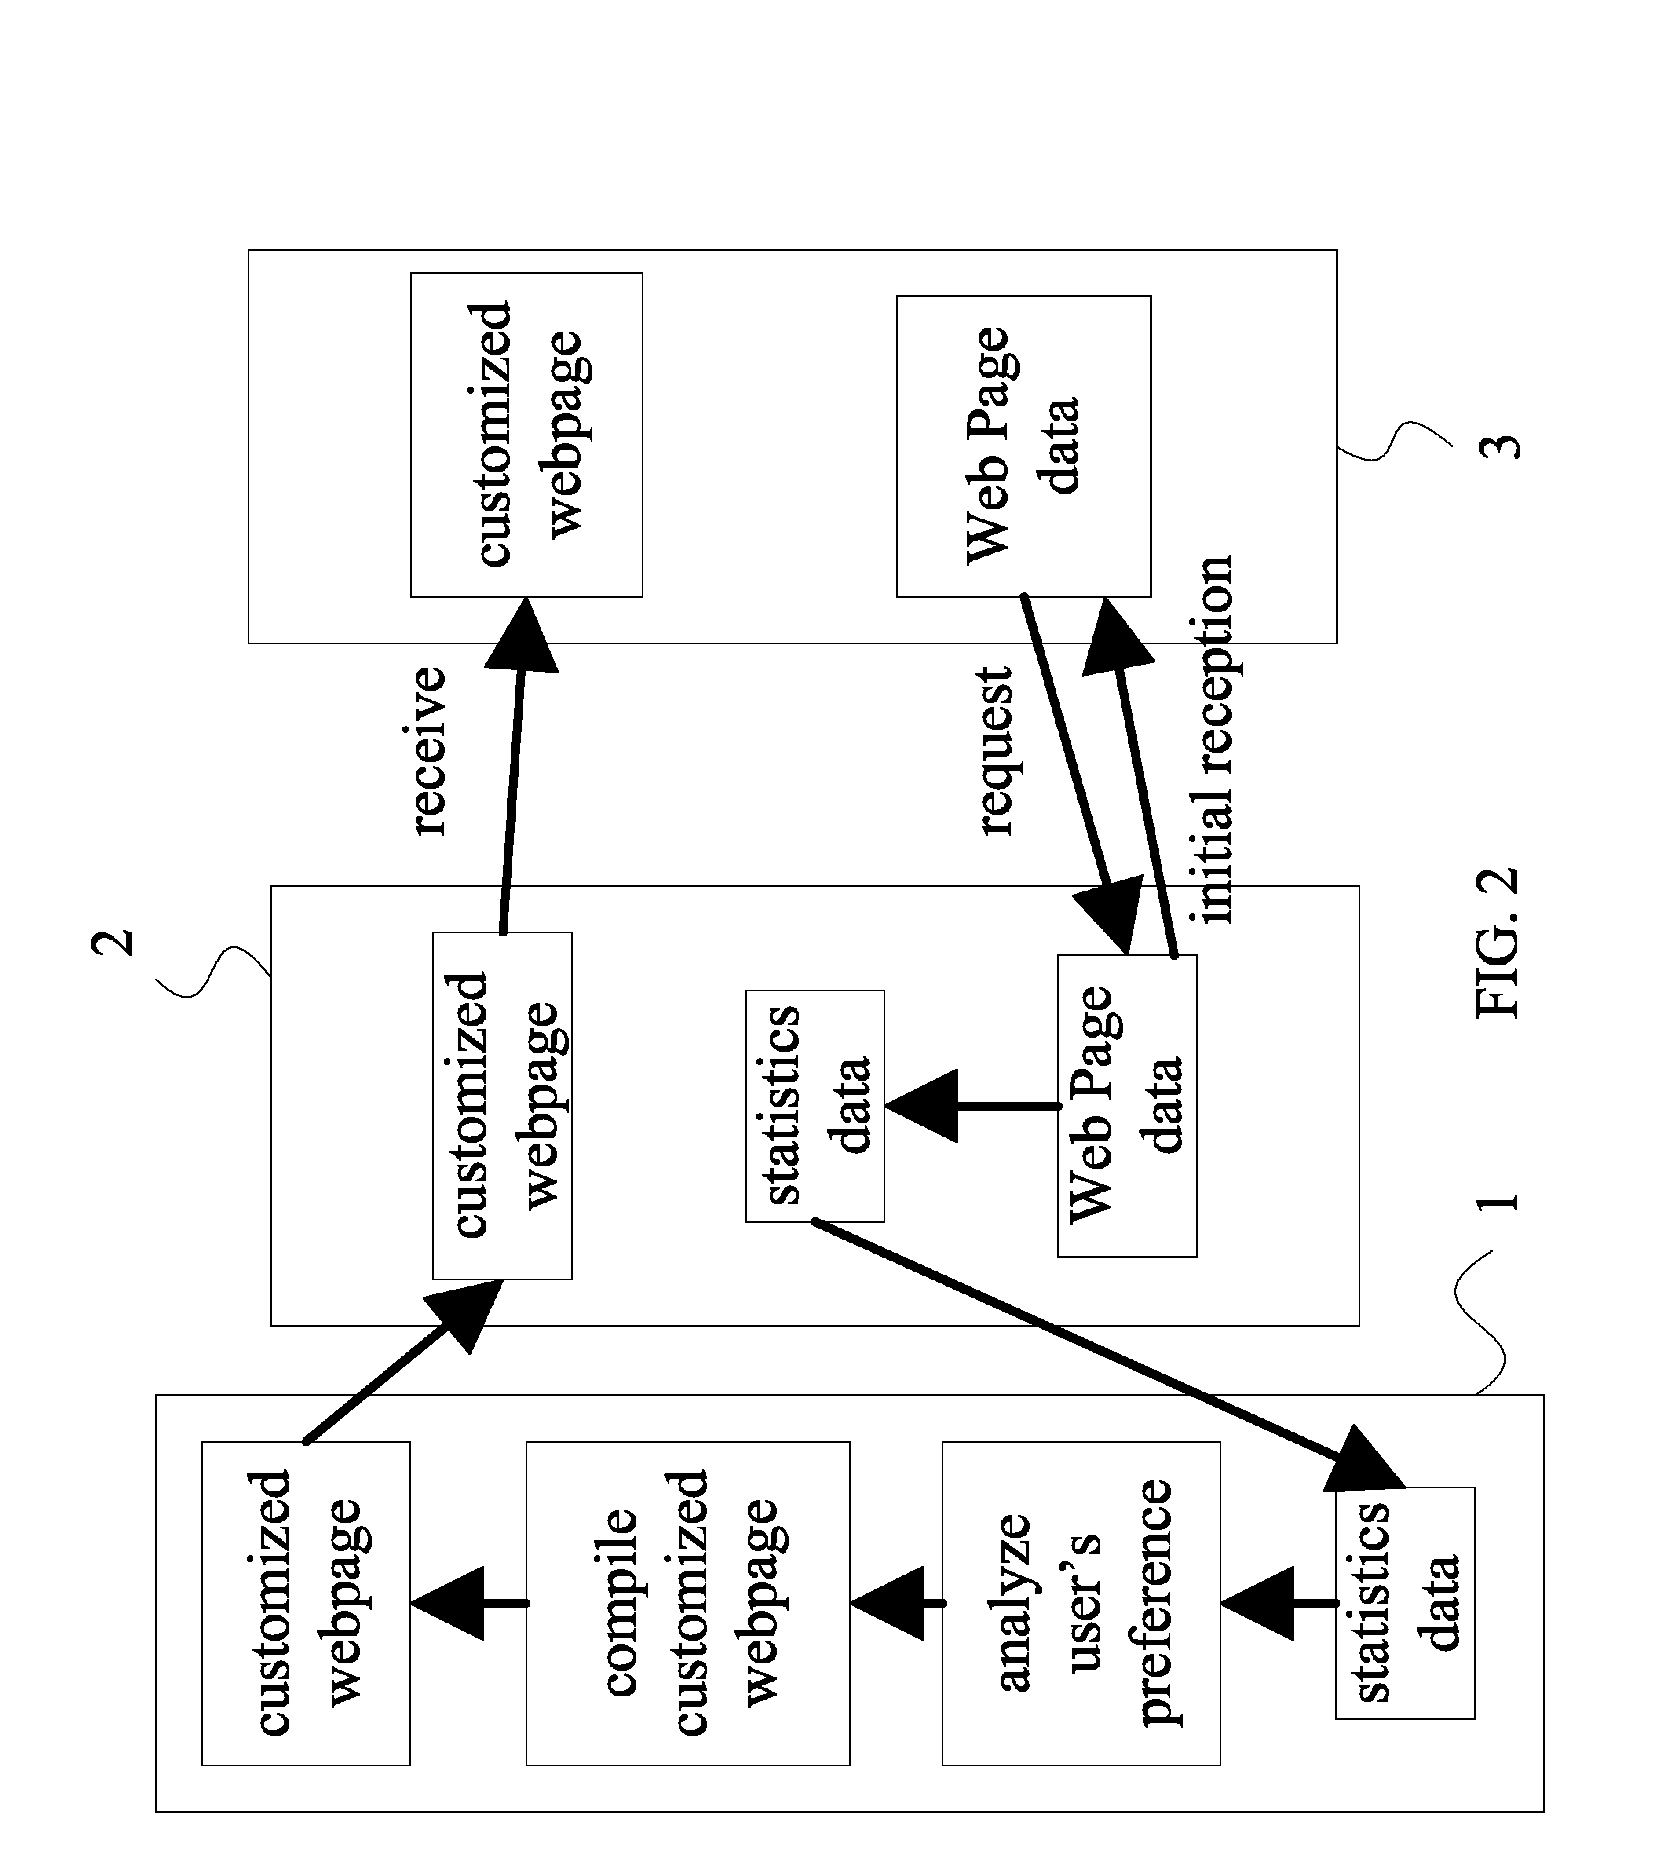 System and method for automatic generation of user-oriented homepage